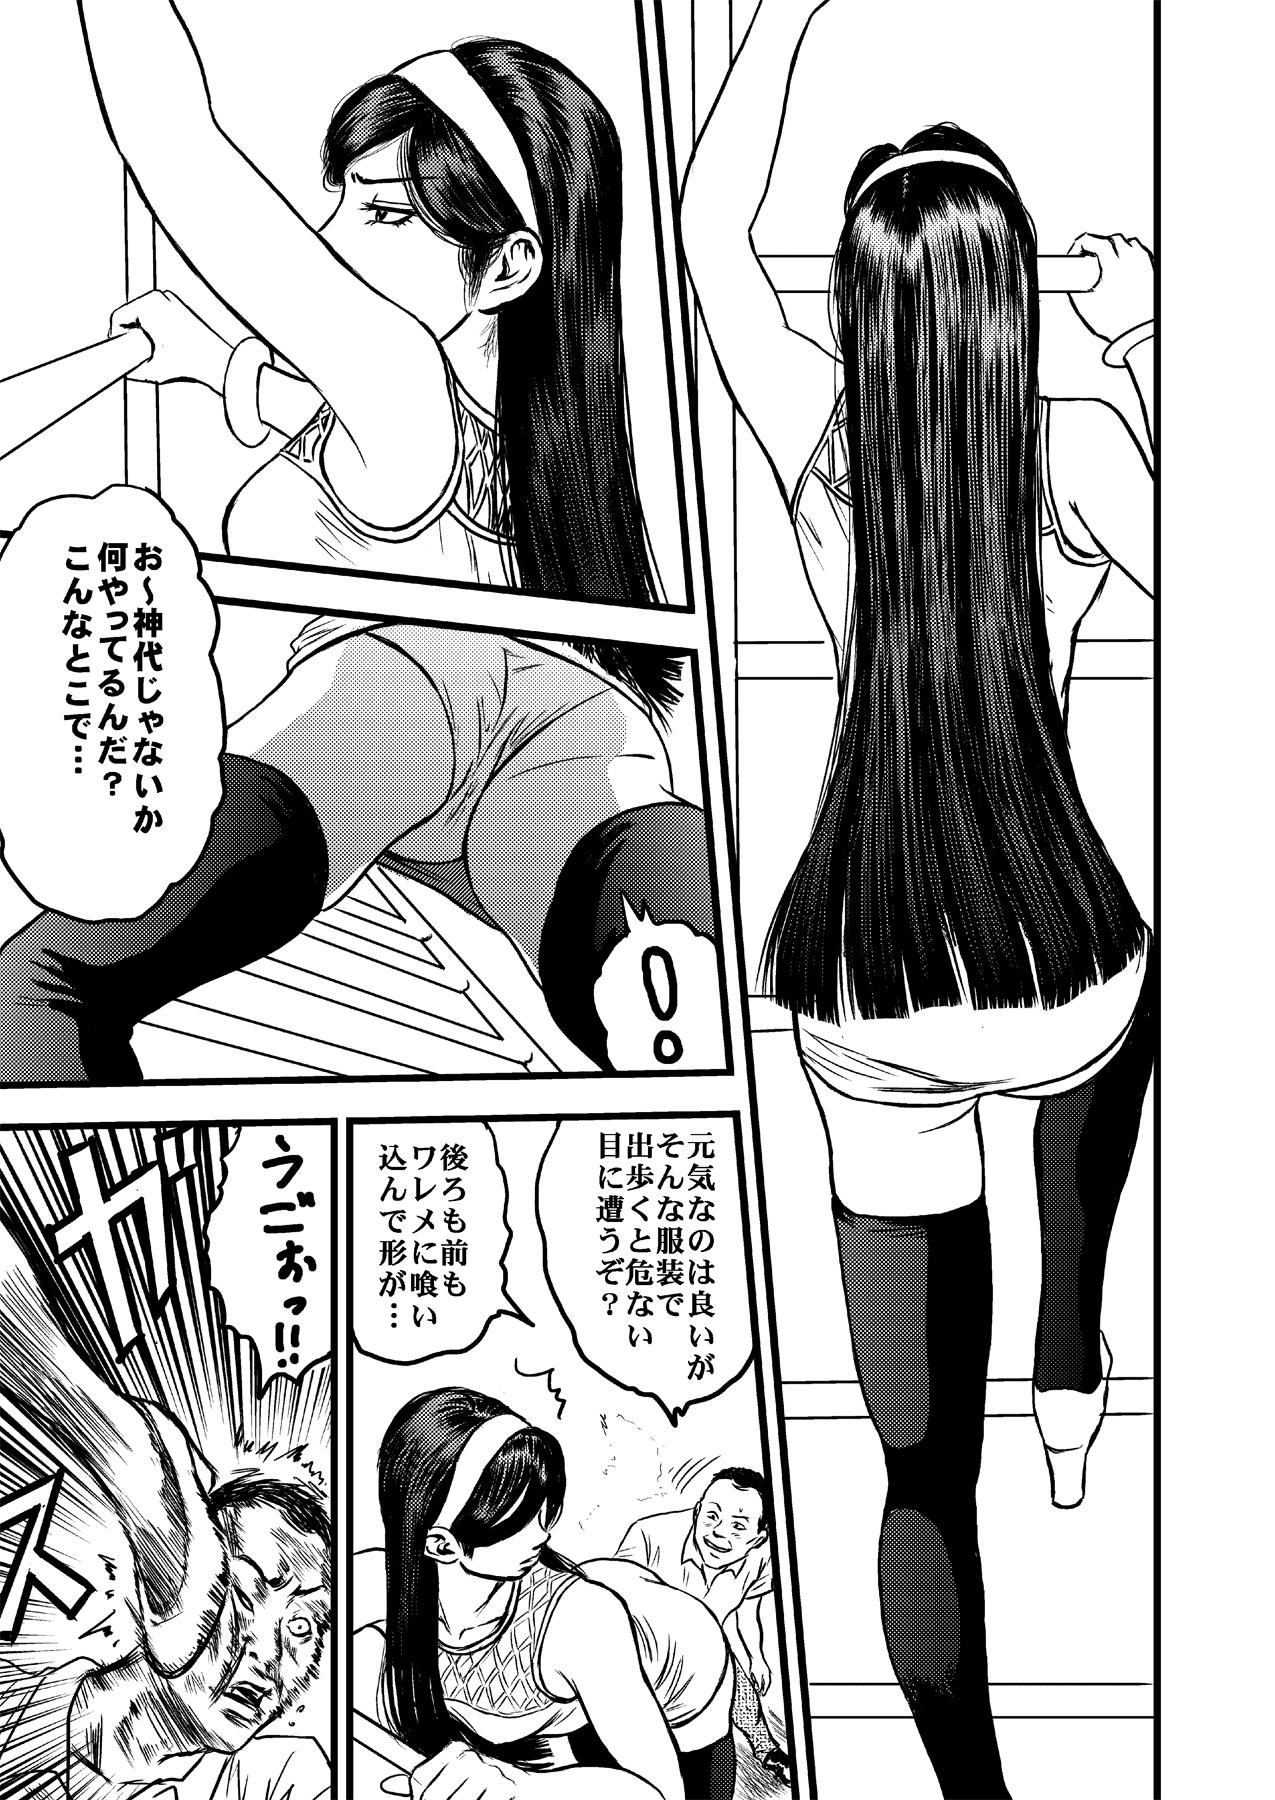 Lezbi Occult Ojousama no Yuuutsu - Occult academy Hot Naked Women - Page 5